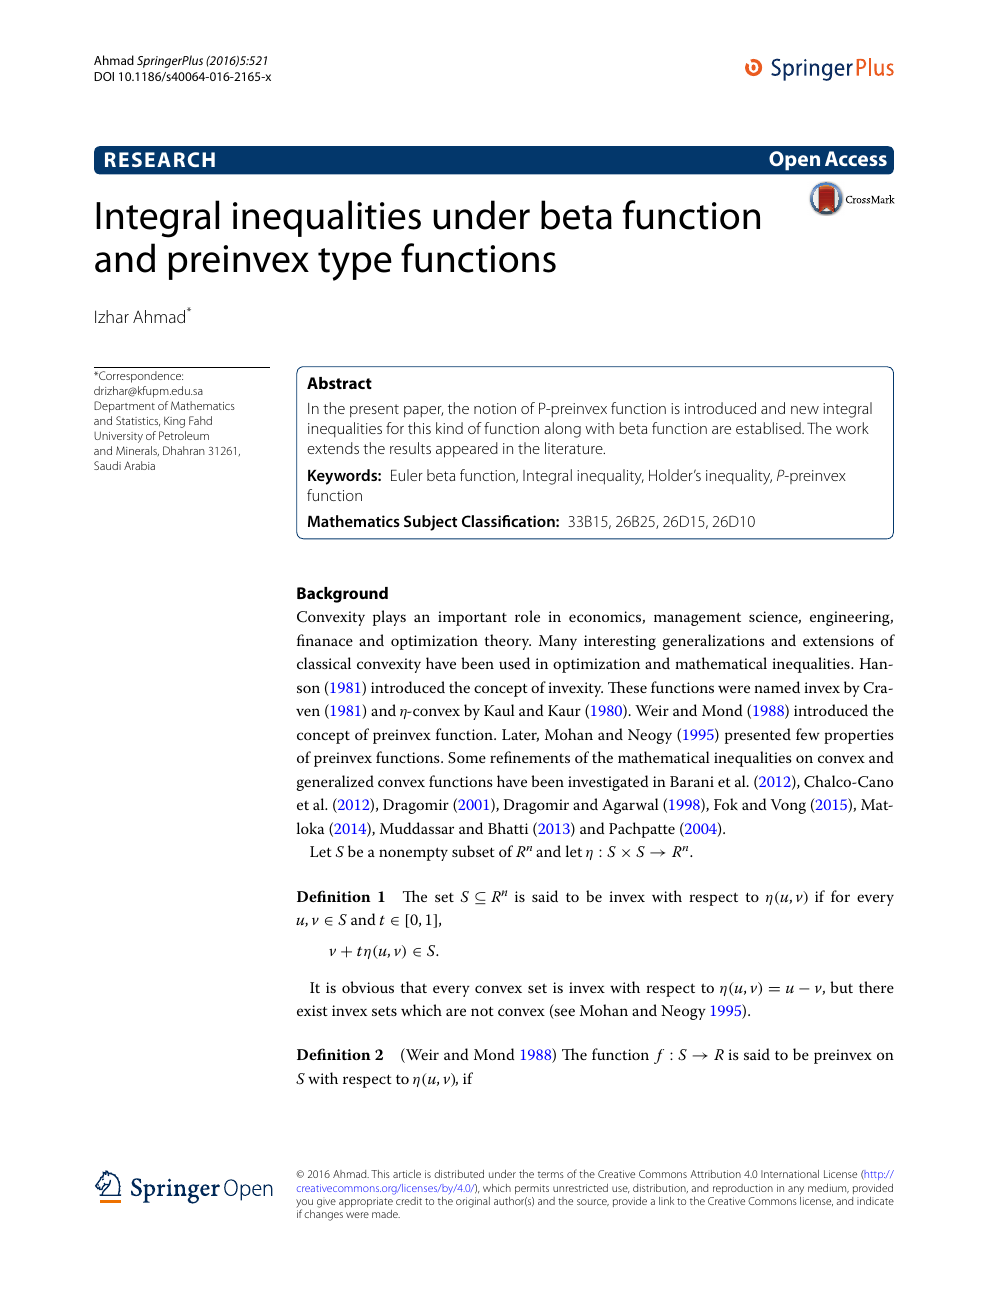 Integral Inequalities Under Beta Function And Preinvex Type Functions Topic Of Research Paper In Mathematics Download Scholarly Article Pdf And Read For Free On Cyberleninka Open Science Hub